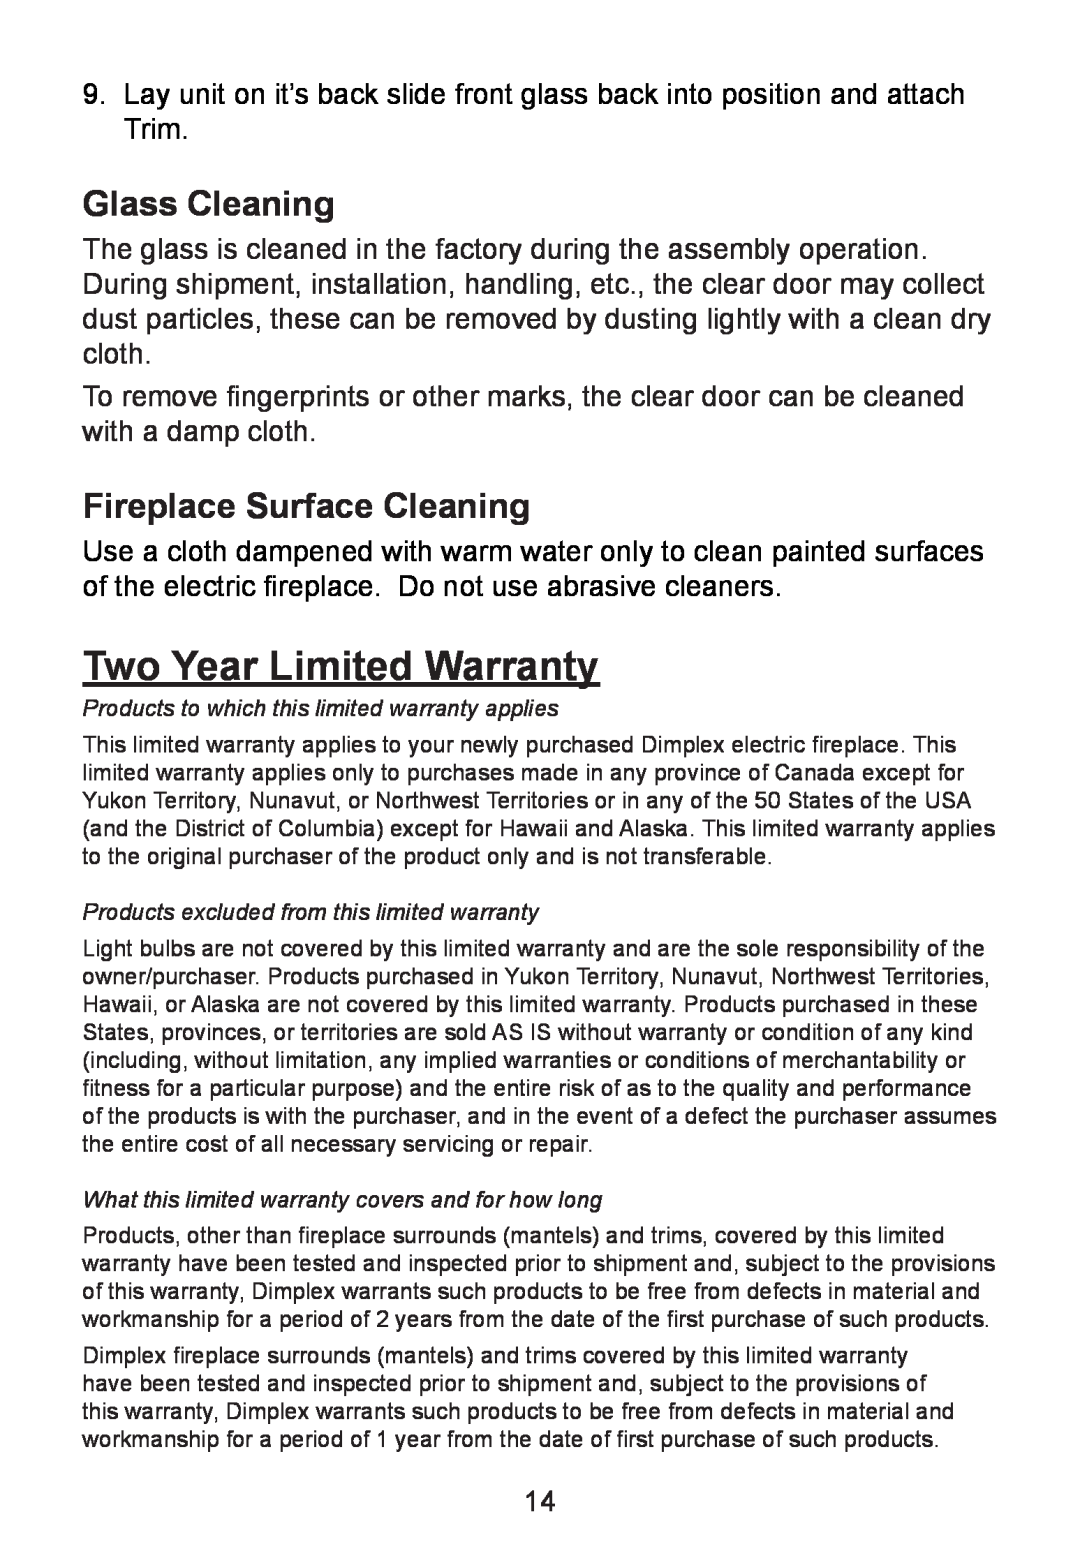 Dimplex BF8000ST owner manual Two Year Limited Warranty, Glass Cleaning, Fireplace Surface Cleaning 